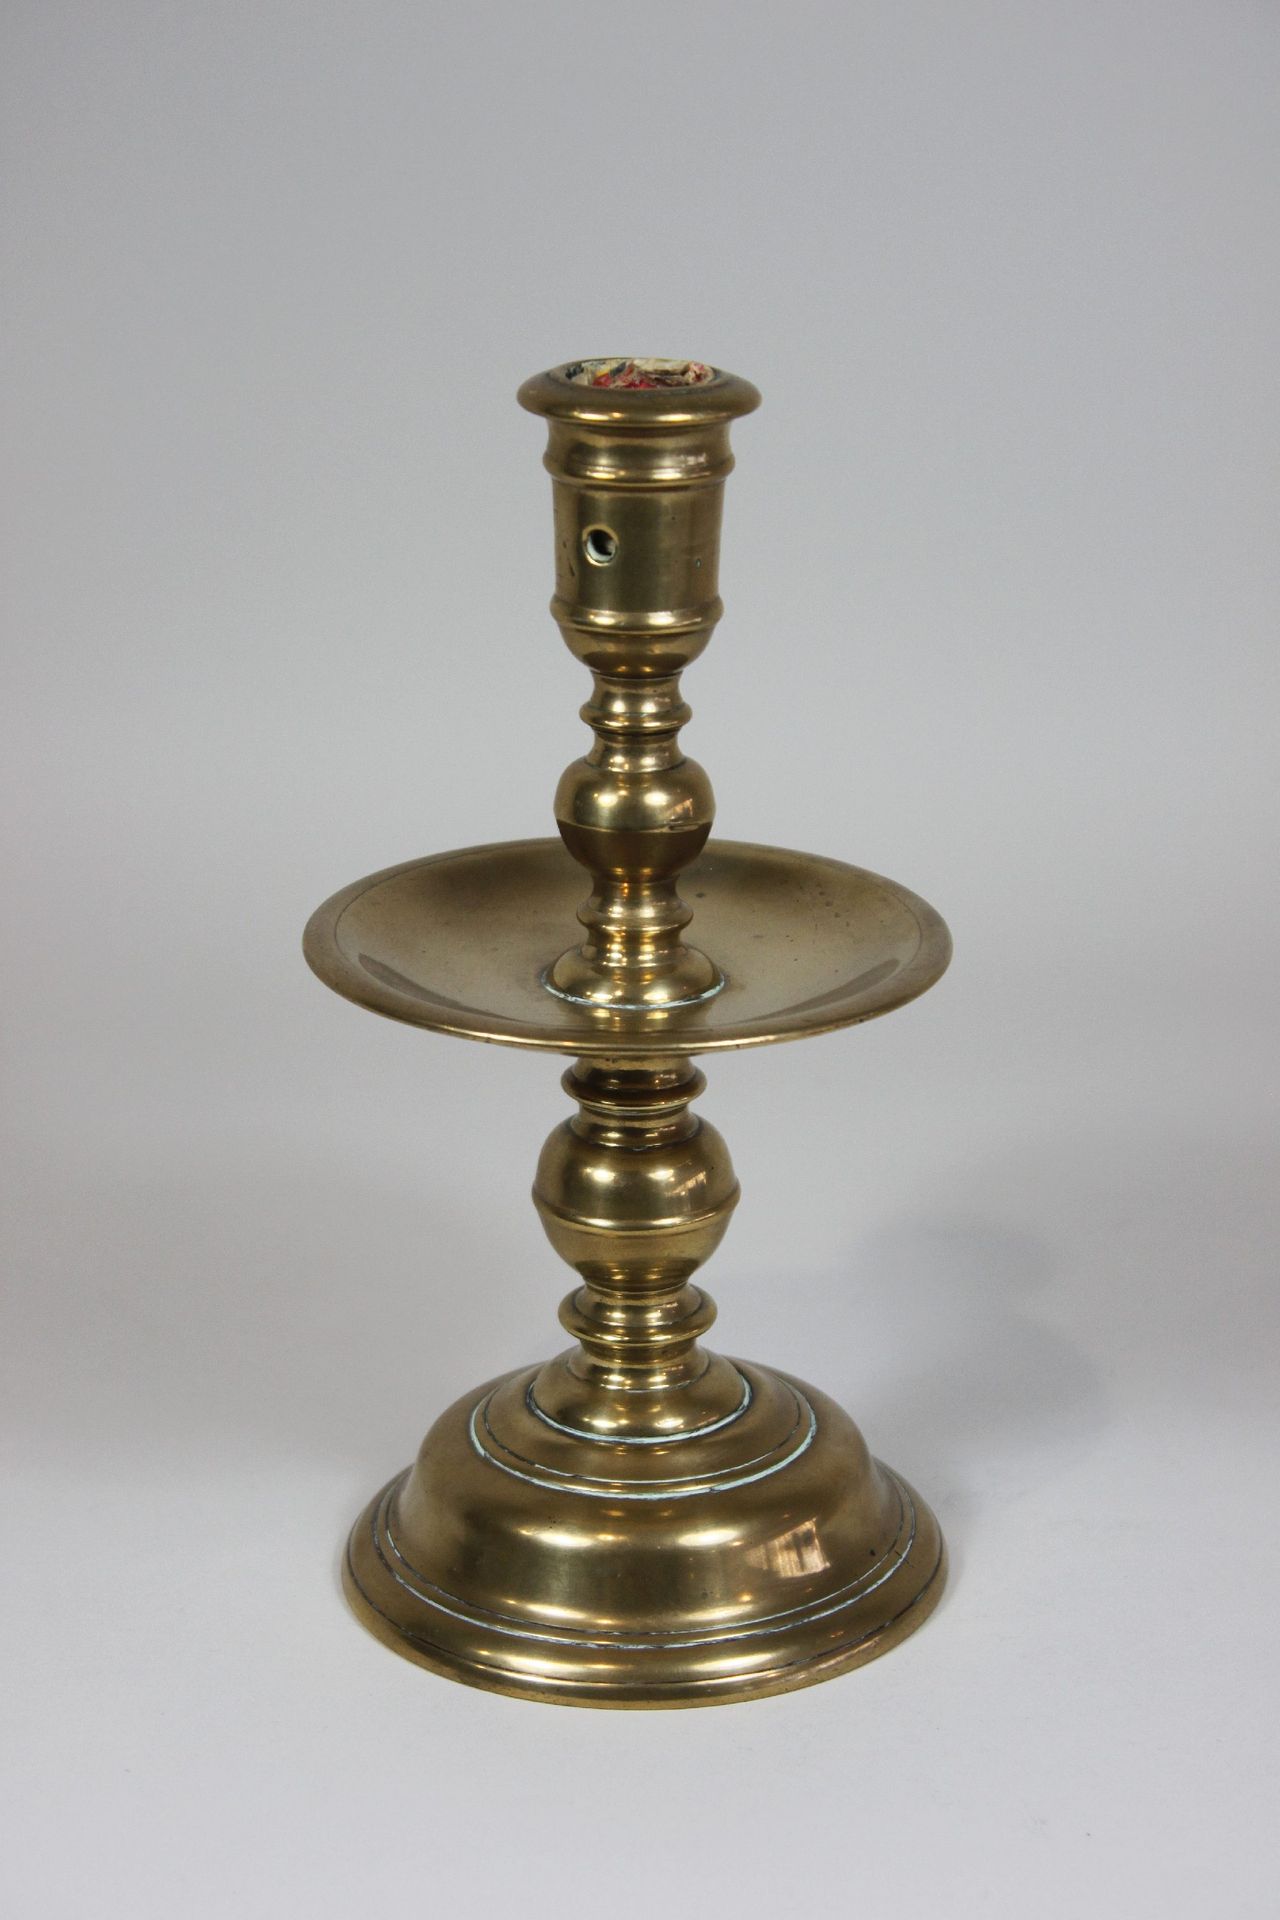 Leuchter, 17. Jh., Messing Candlestick, 17th century, cast brass, single flame. &hellip;